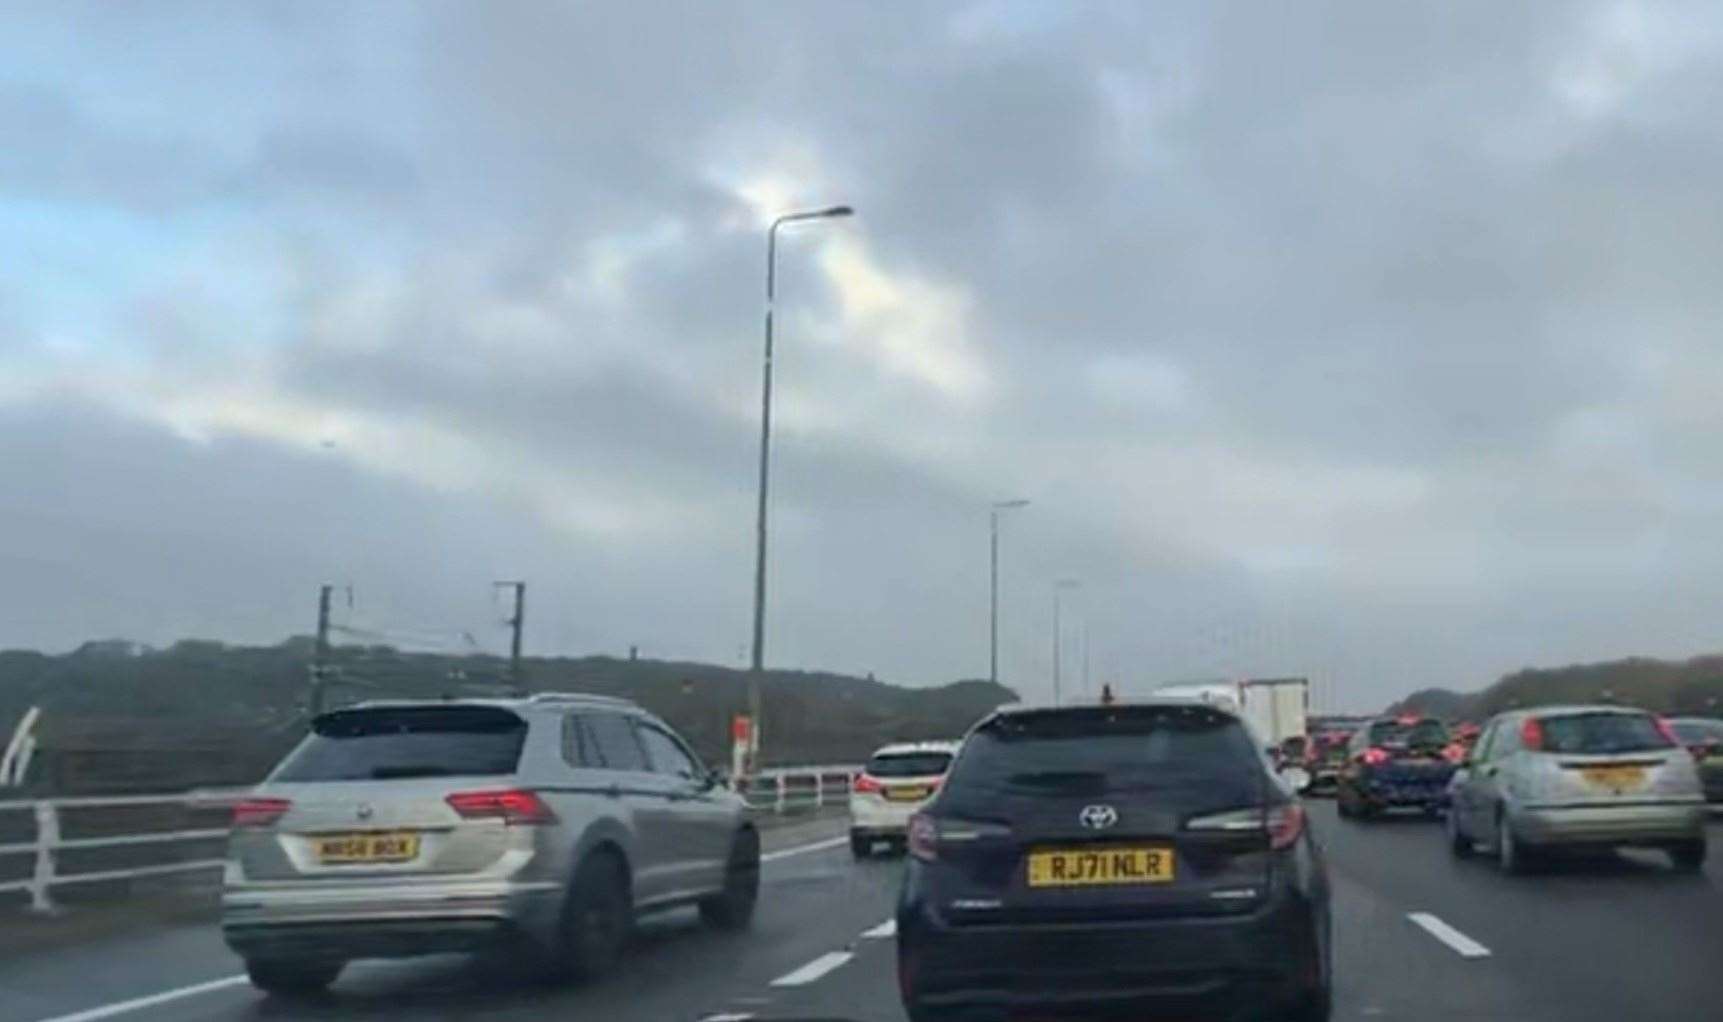 Three lanes on the A2 towards London were shut between the M2 and A227 in Gravesend due to a multi-vehicle crash